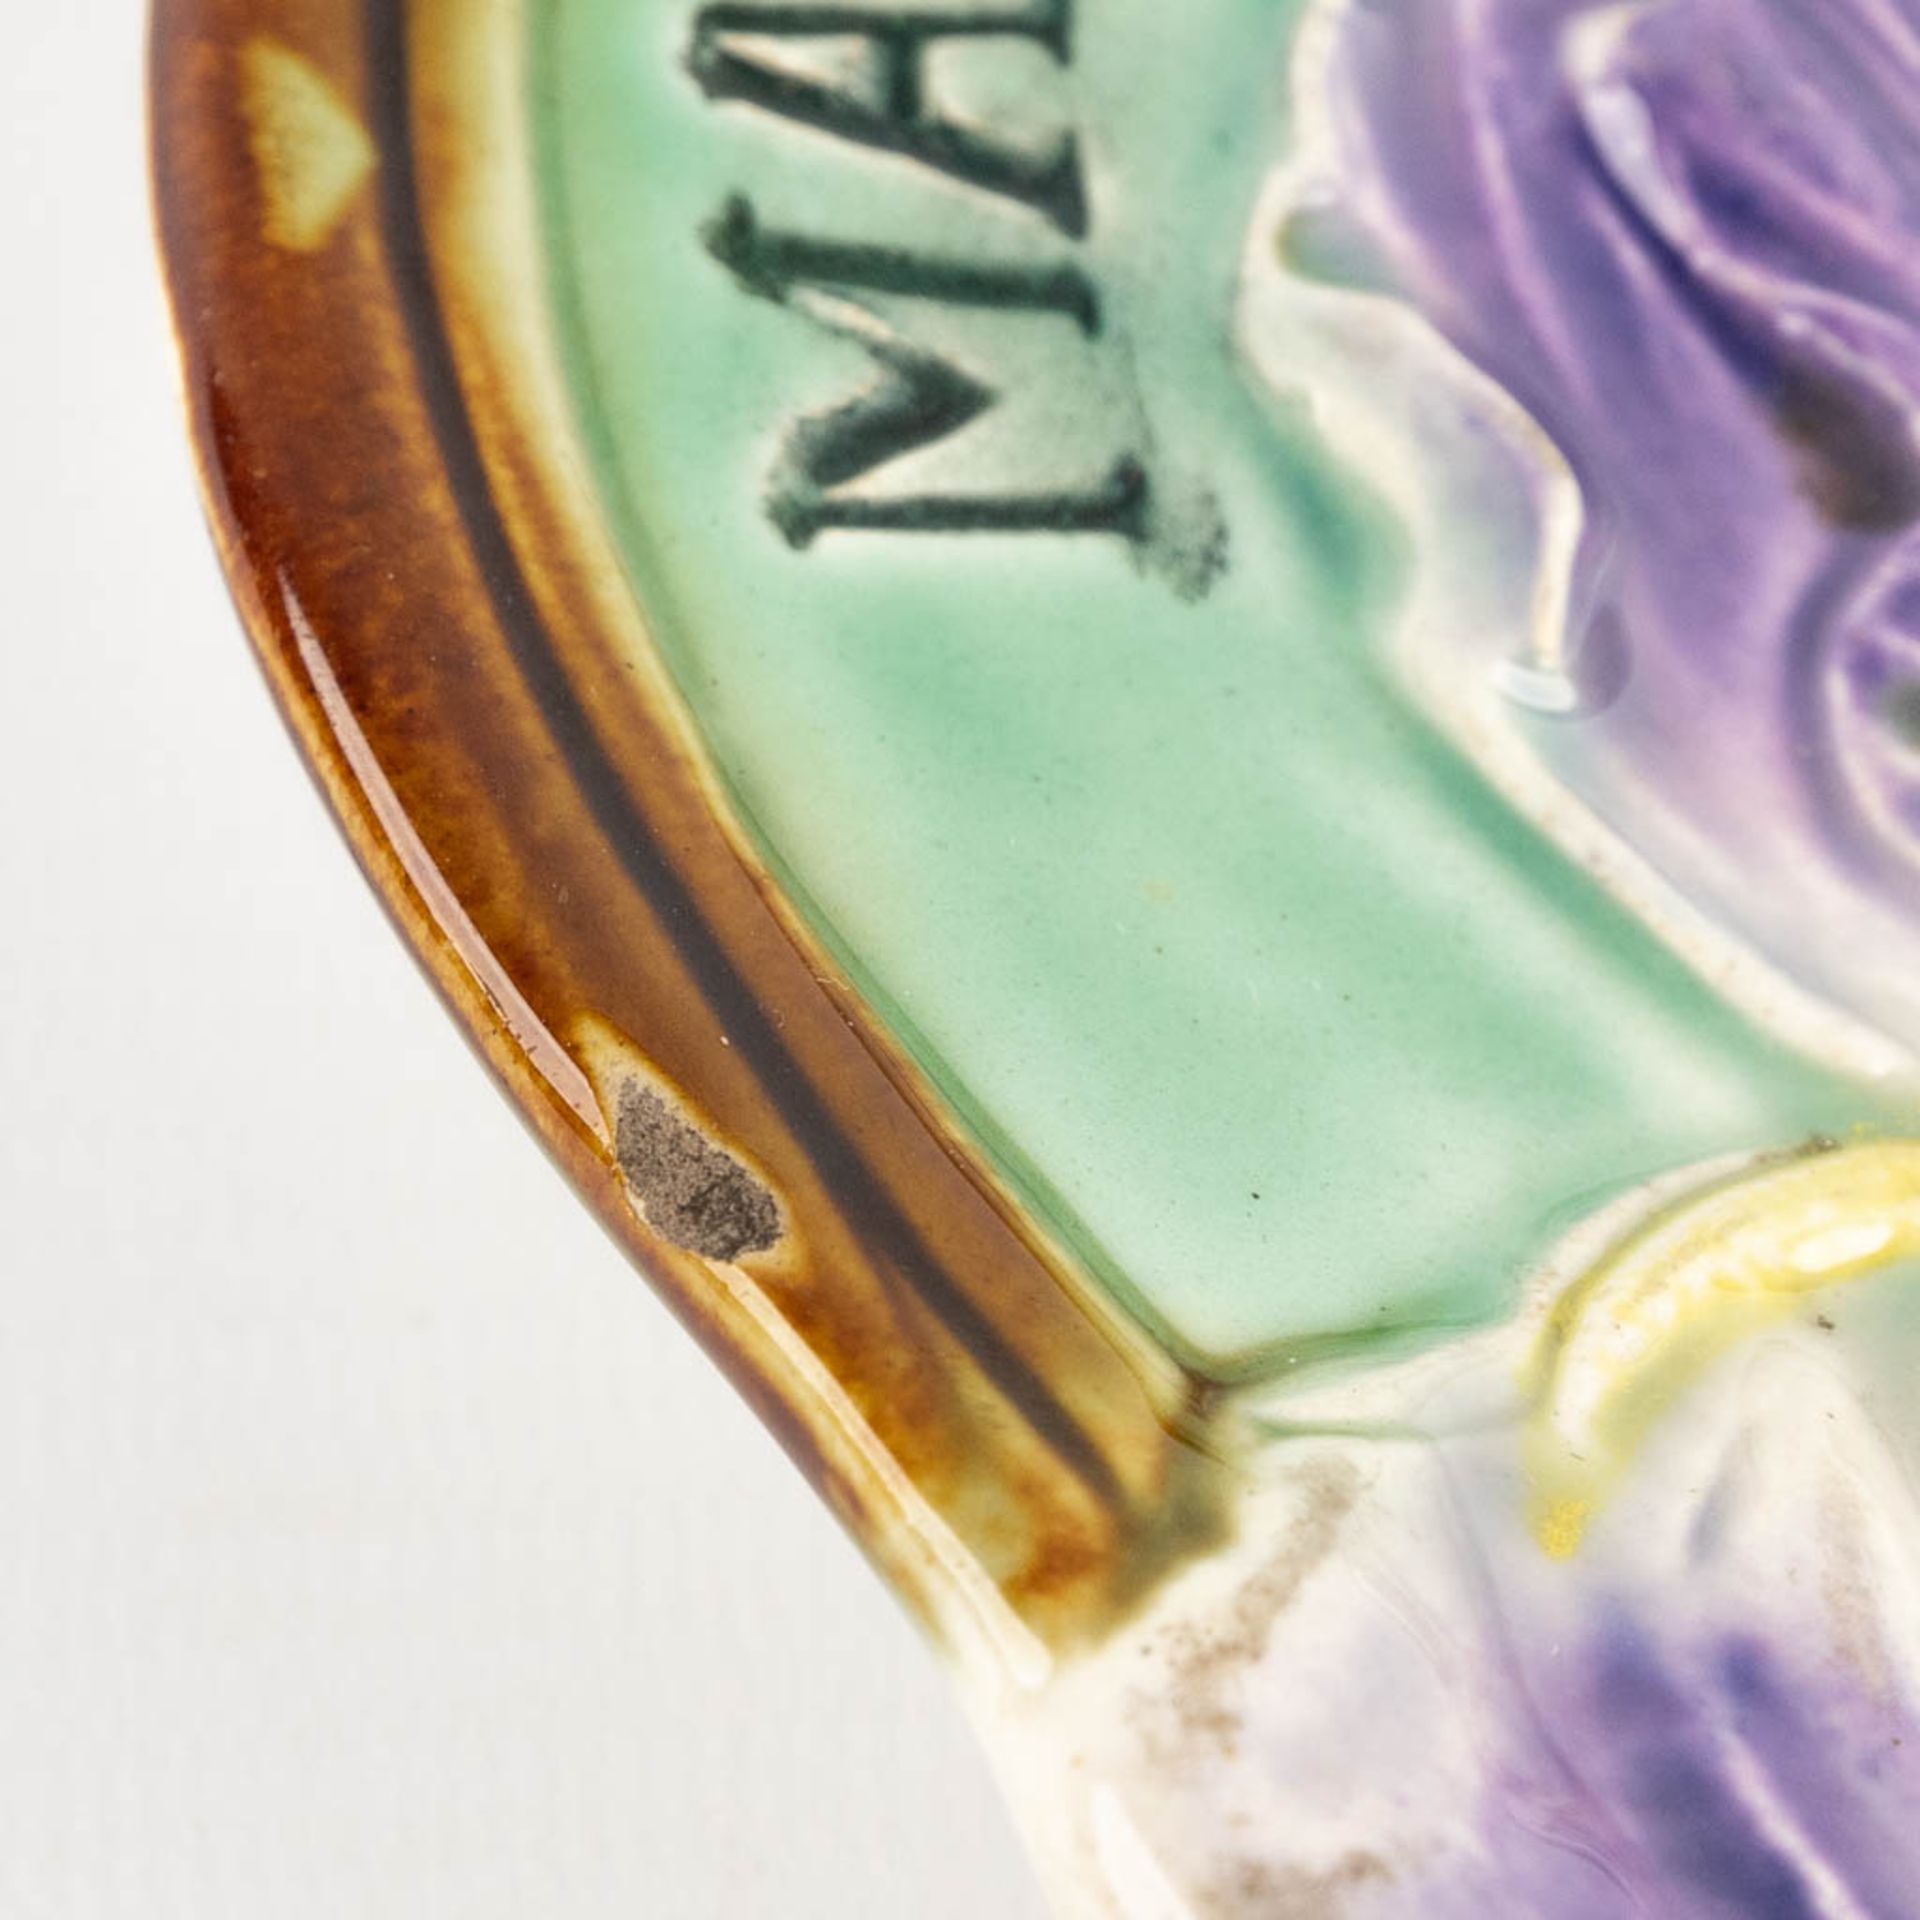 Hasselts Faience, a bowl ?Maison Charles? Confections Gand, Belgium, 19th C. (D:20 x W:26 x H:3,5 cm - Image 5 of 7